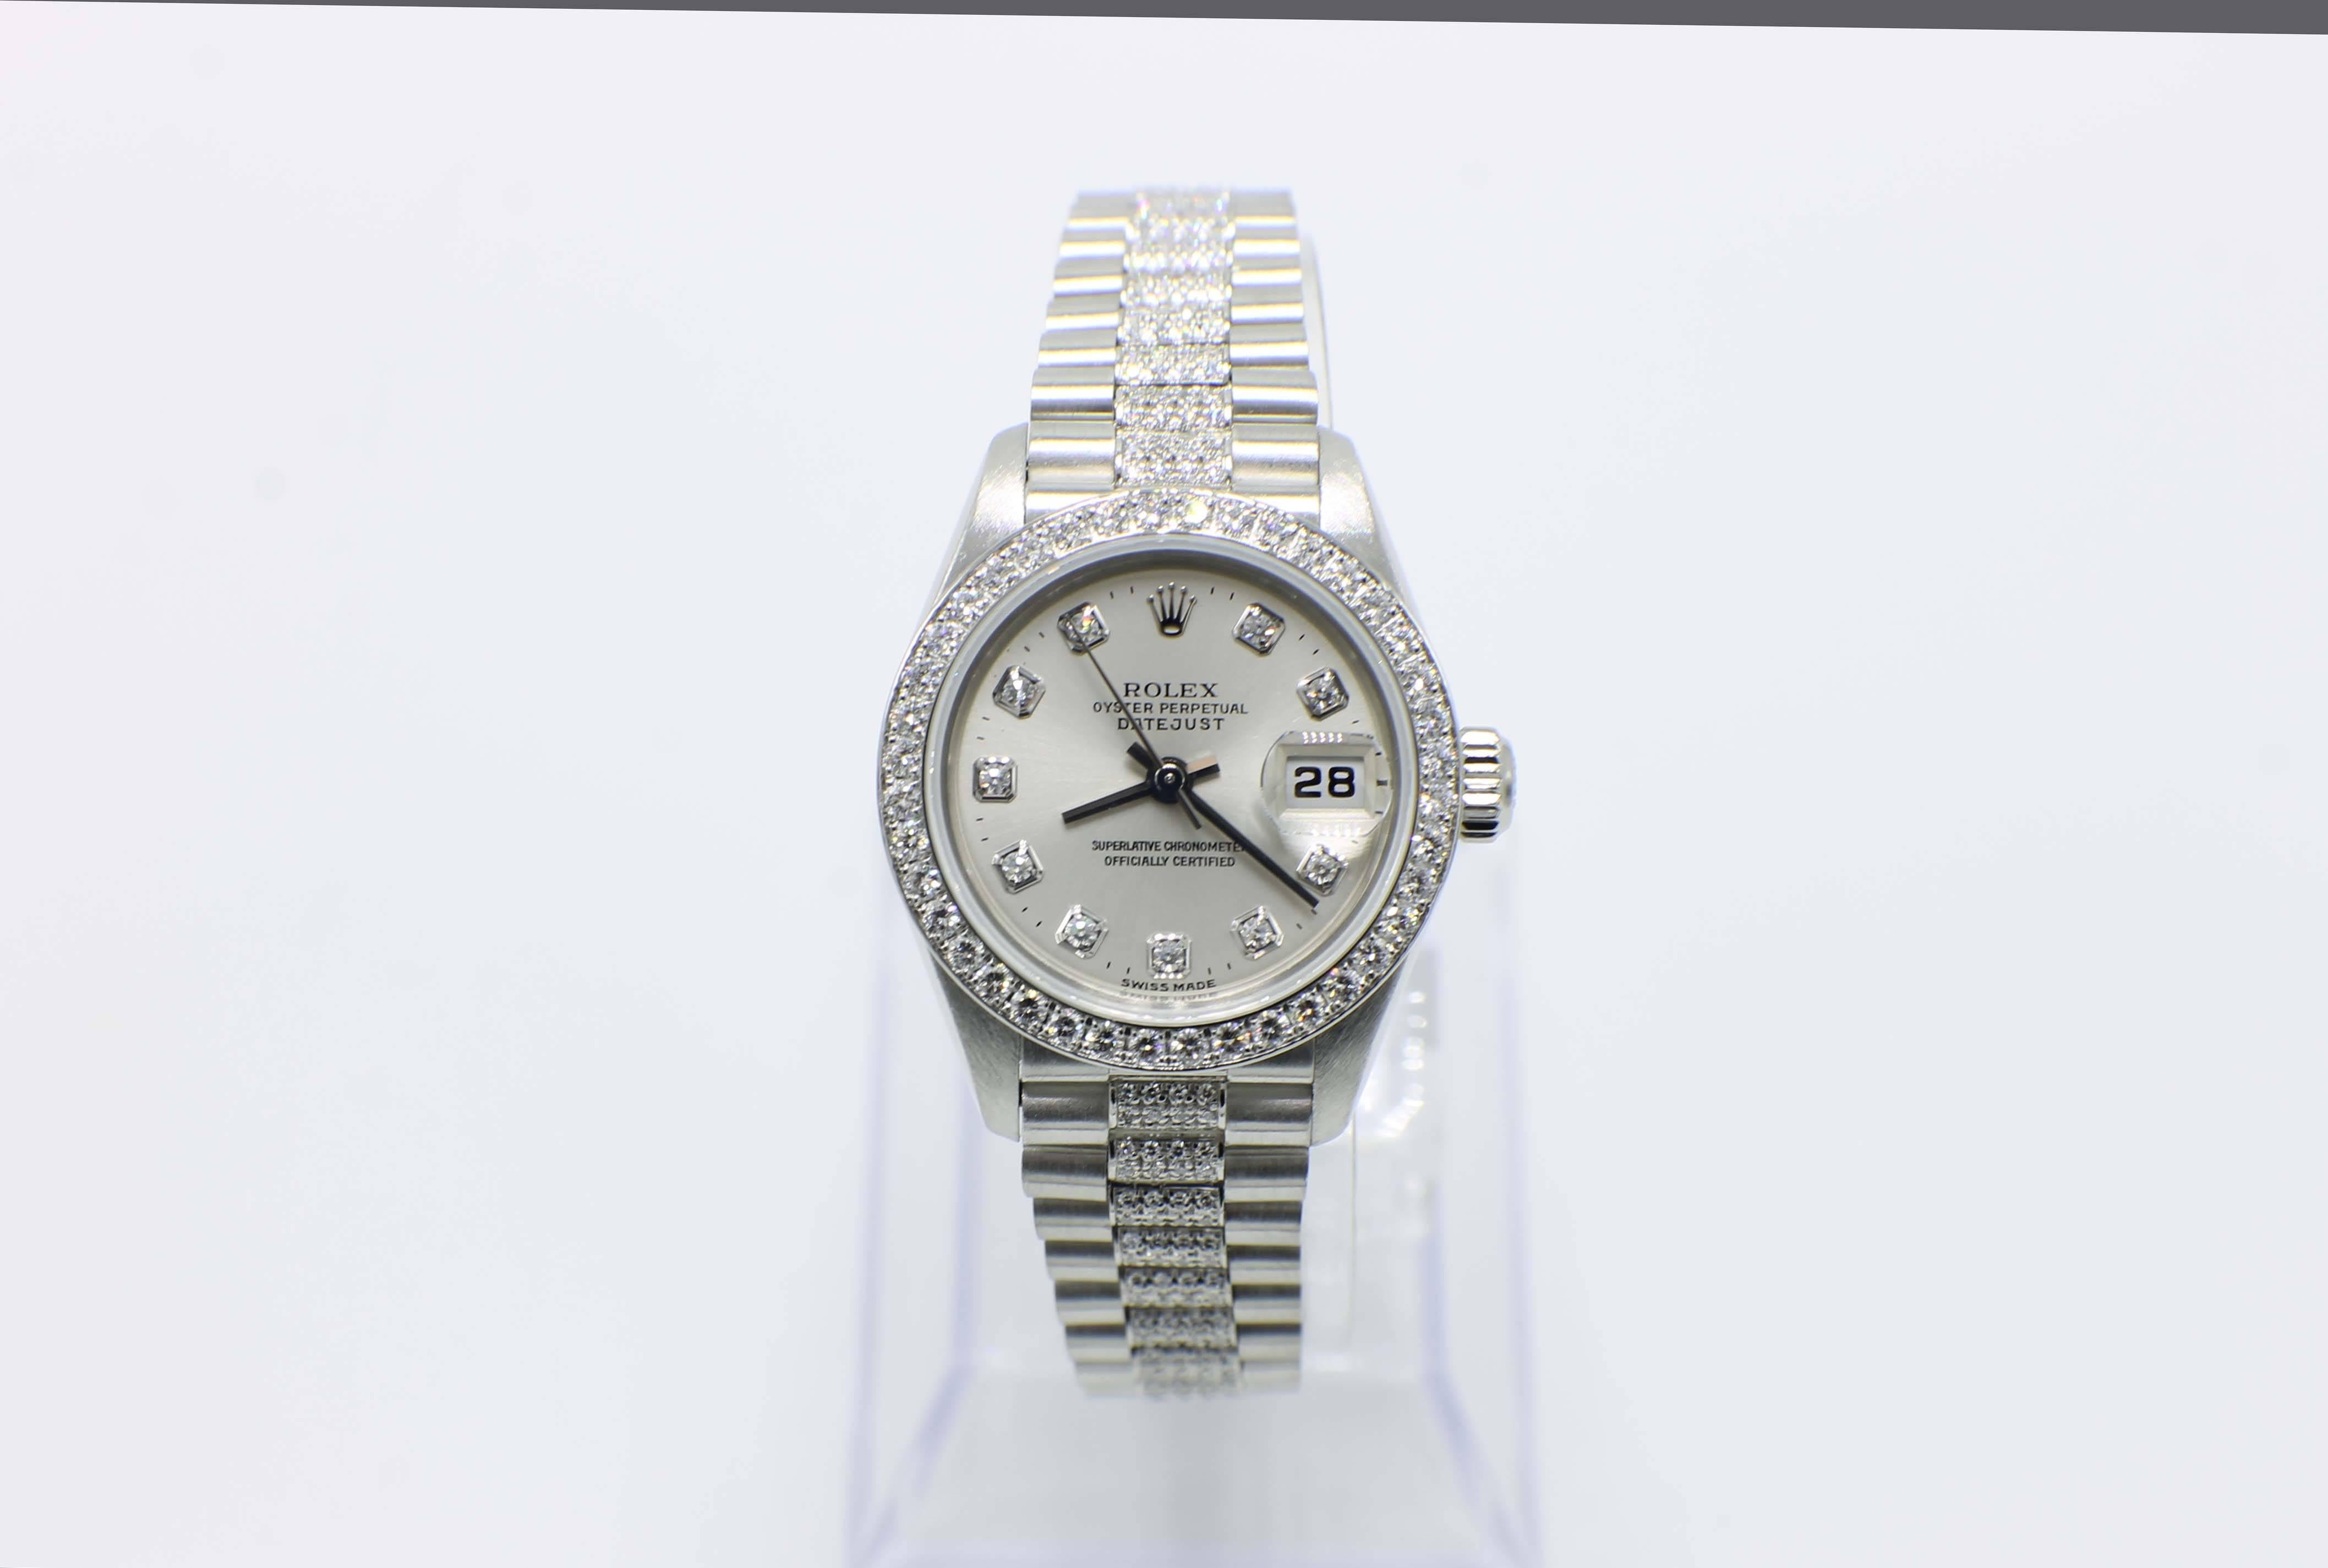 Style Number: 79136

Serial: P199***

Year: 2003

Model: Ladies President 

Case Material: Platinum

Band: Platinum with Diamonds on the Band

Bezel: Original Factory Diamond Bezel

Dial: Original Factory Silver Diamond Dial

Face: Sapphire